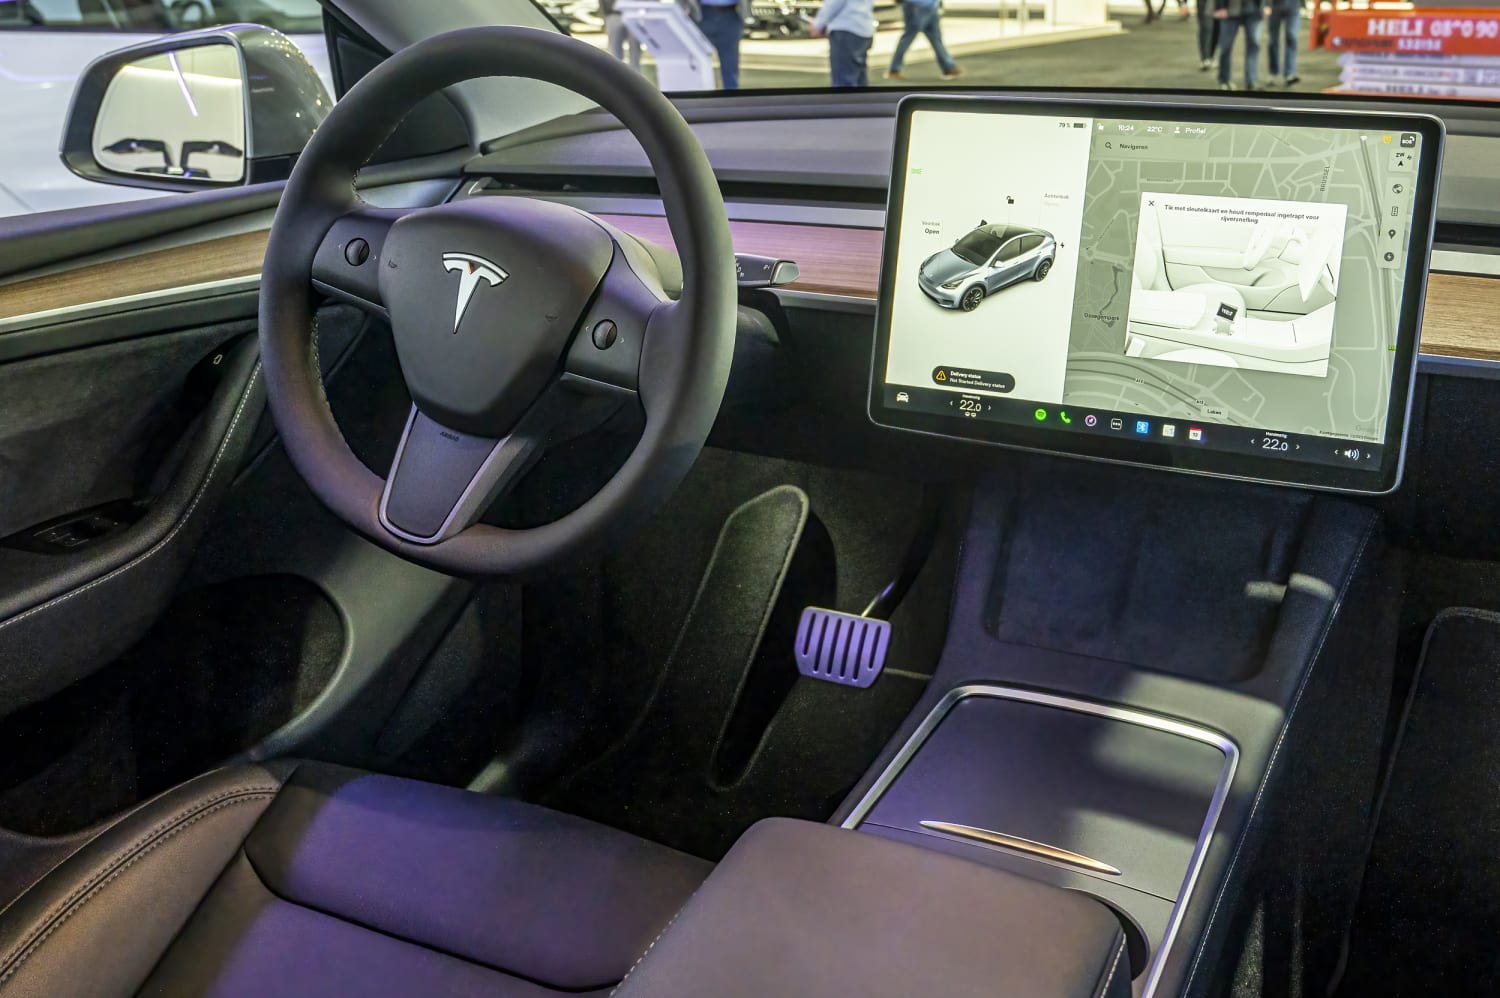 Feds investigating Tesla over complaints that steering wheels are falling off while driving